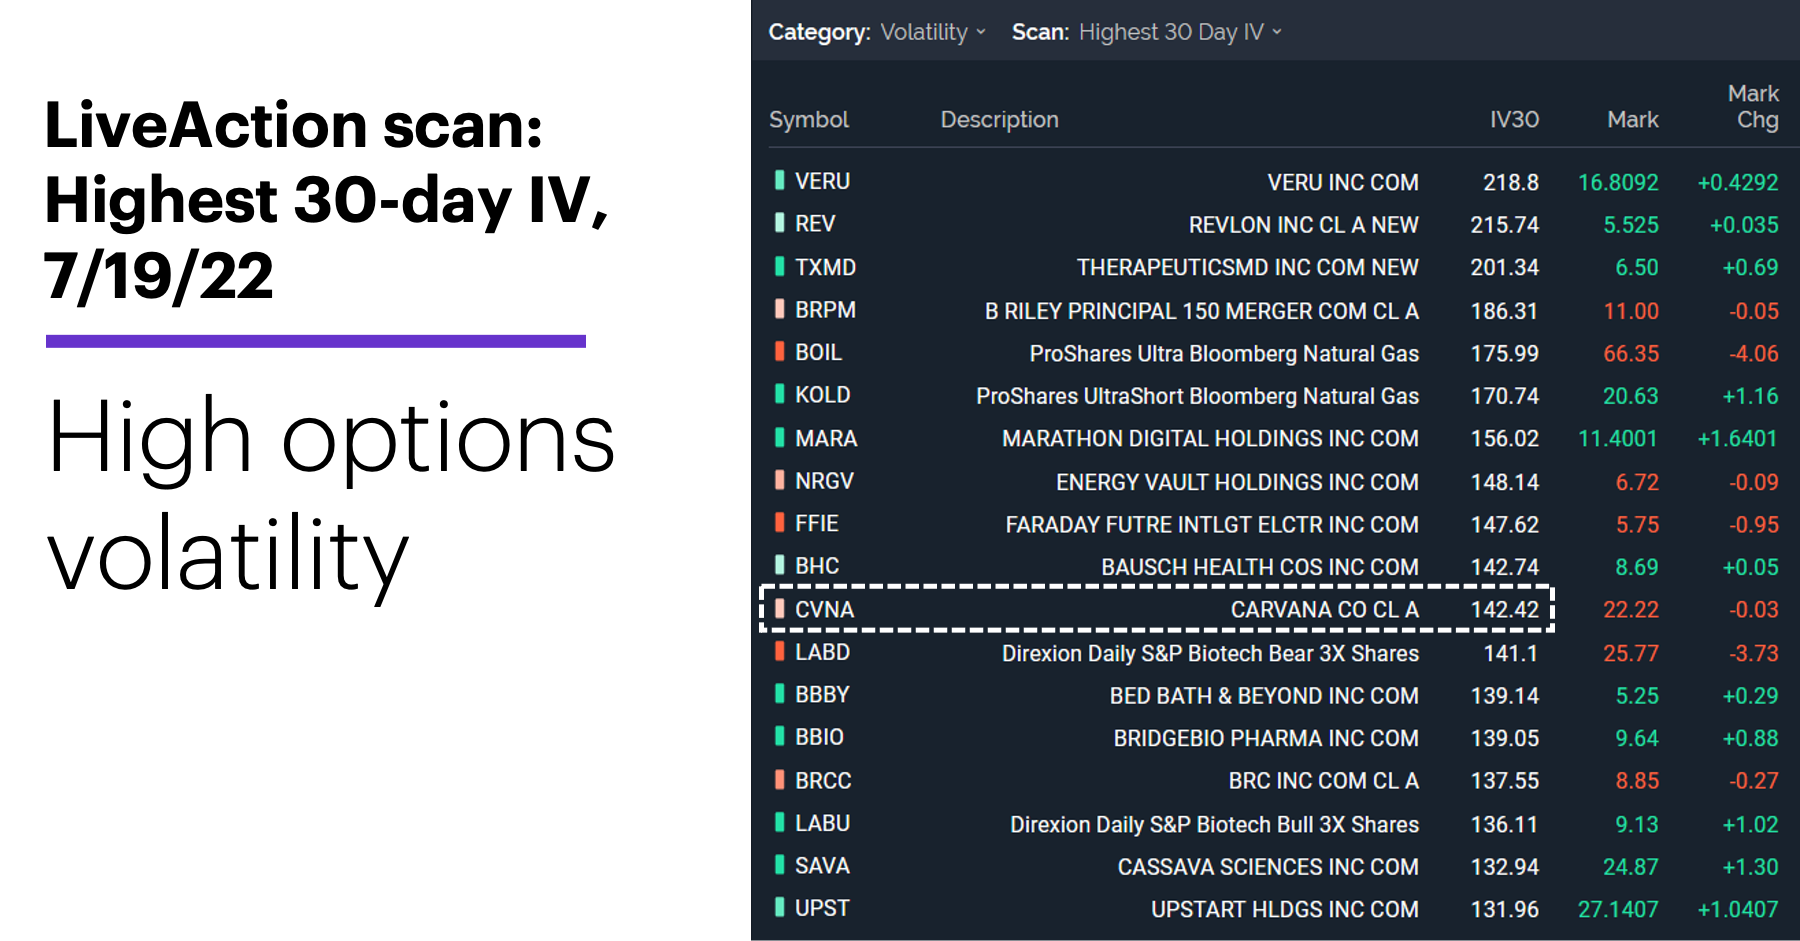 Chart 1: LiveAction scan: Highest 30-day IV, 7/19/22. Unusual options activity. High options volatility.